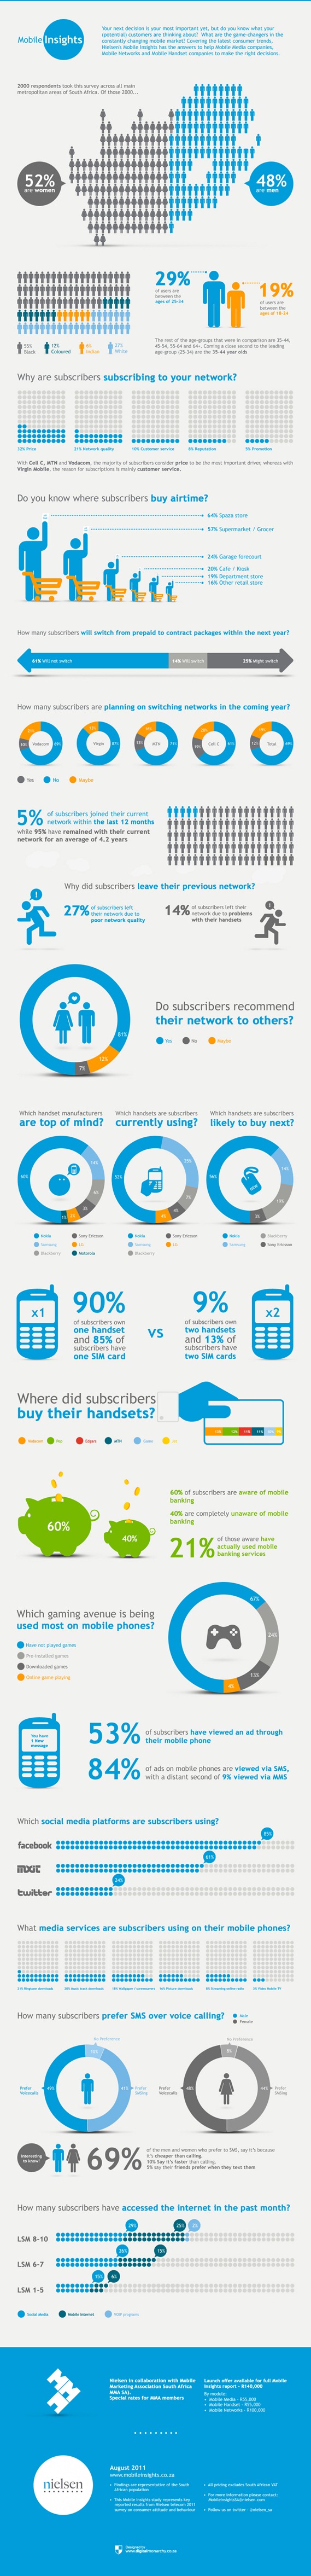 nielsen-mobile-insights-infographic